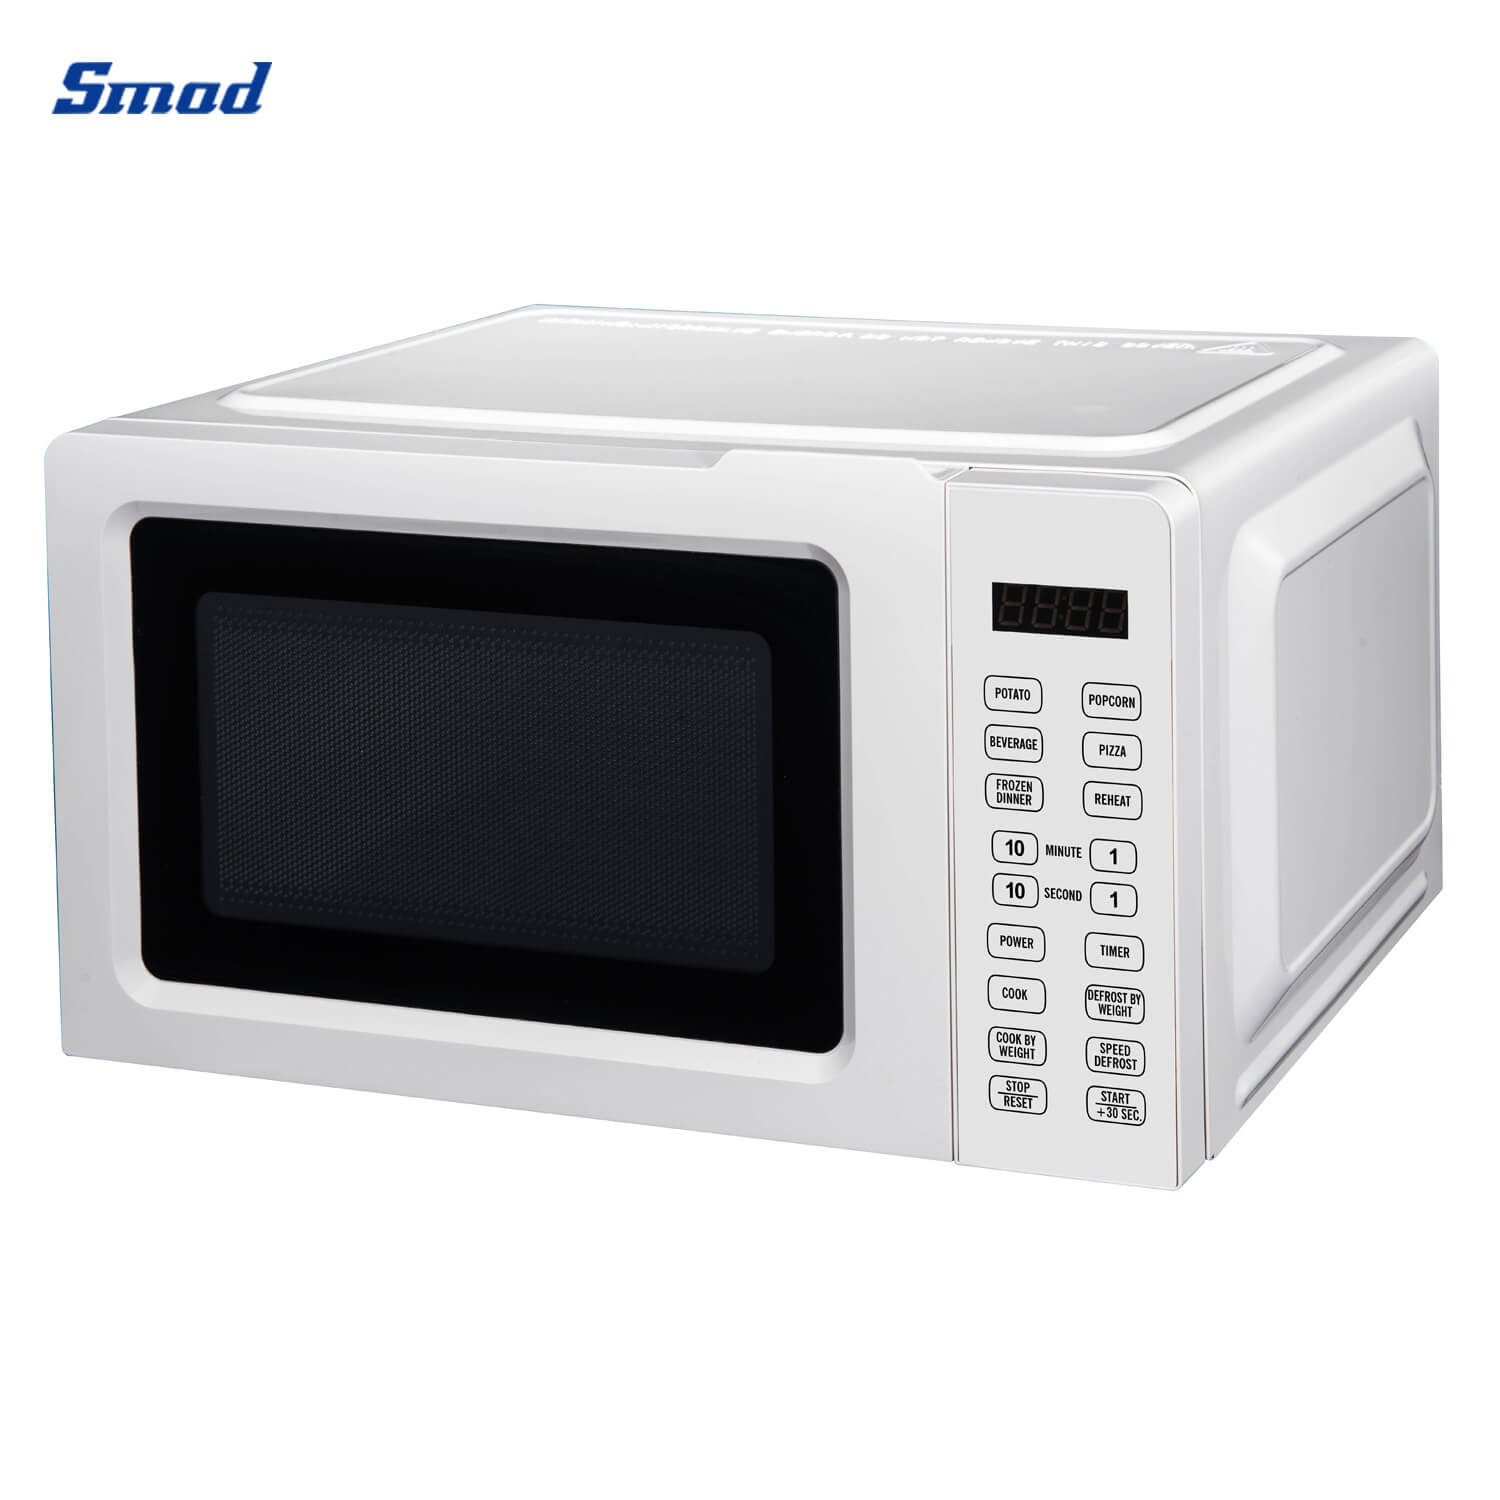 
Smad 20L Black / White Microwave Oven with Cooking End Signal